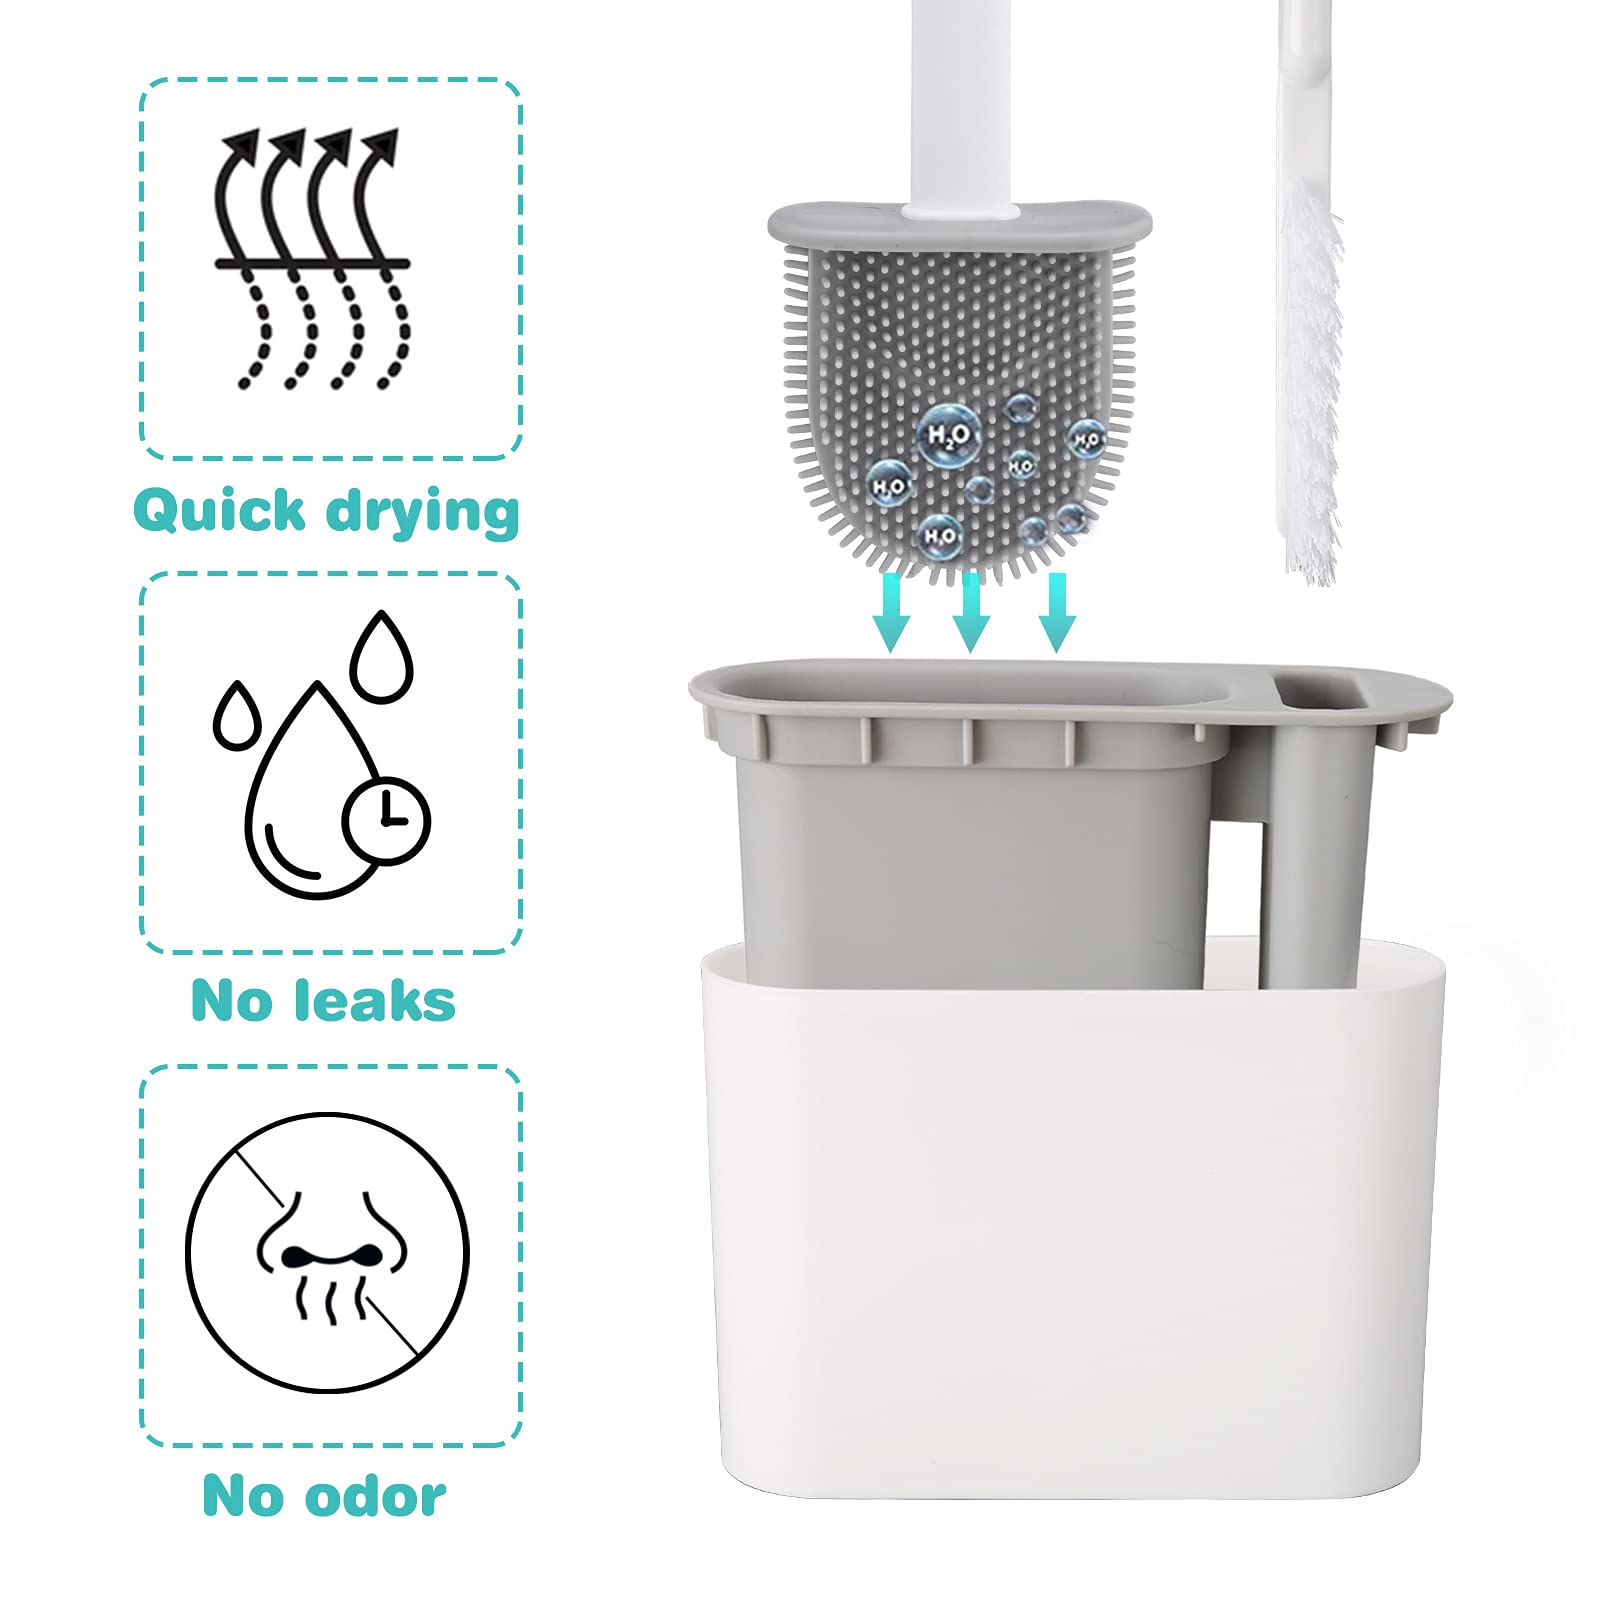 HOW WELL DOES A SILICON TOILET BRUSH WORK